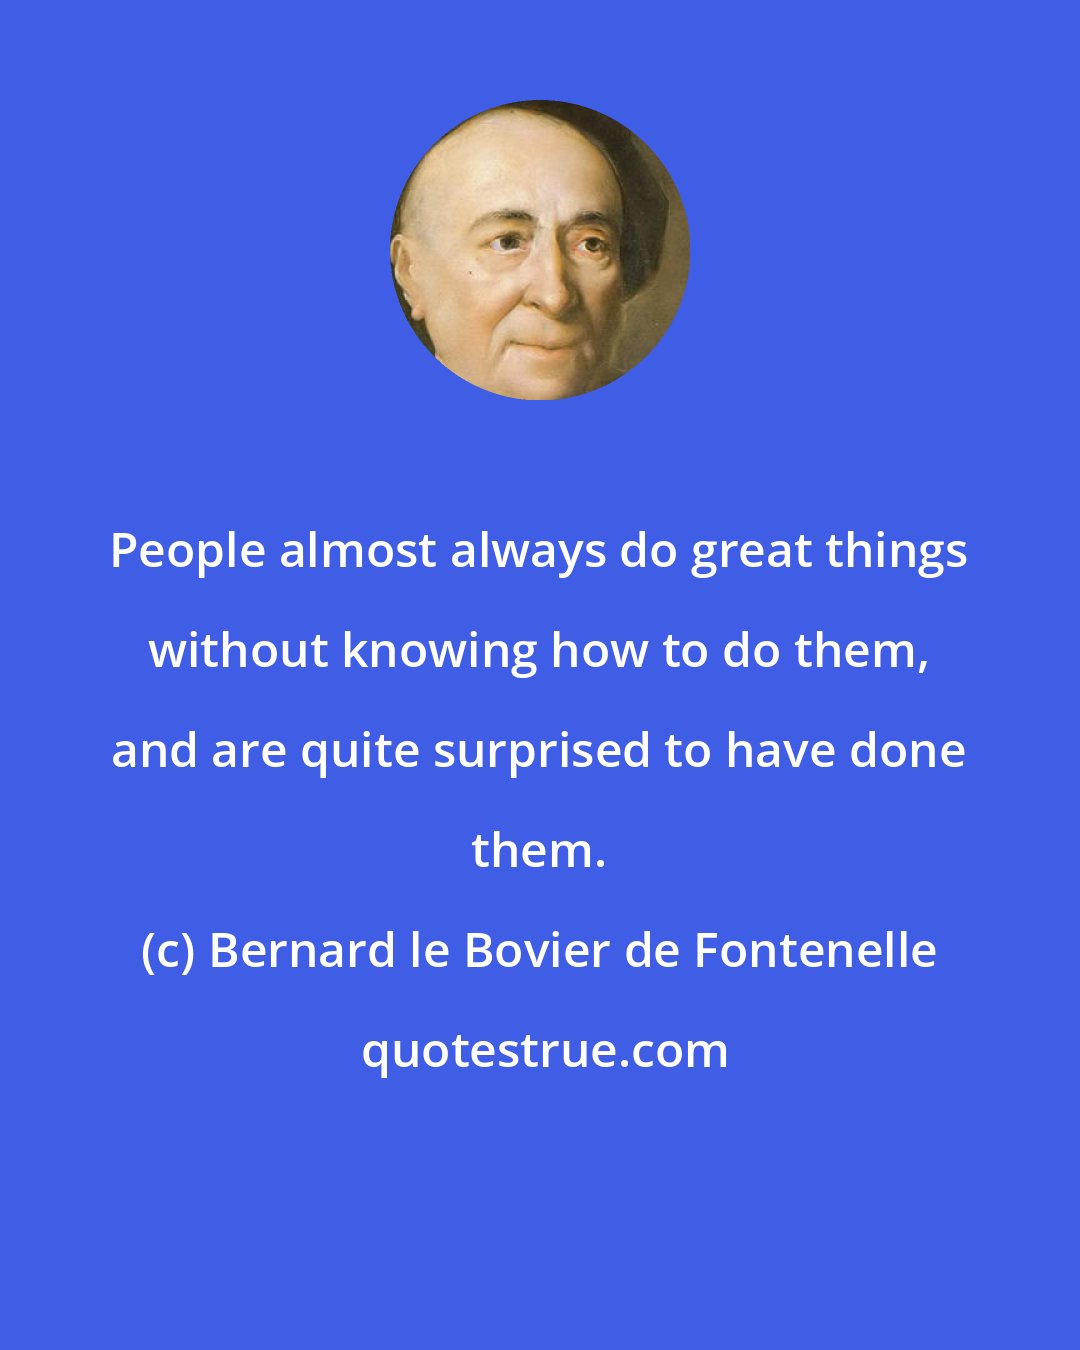 Bernard le Bovier de Fontenelle: People almost always do great things without knowing how to do them, and are quite surprised to have done them.